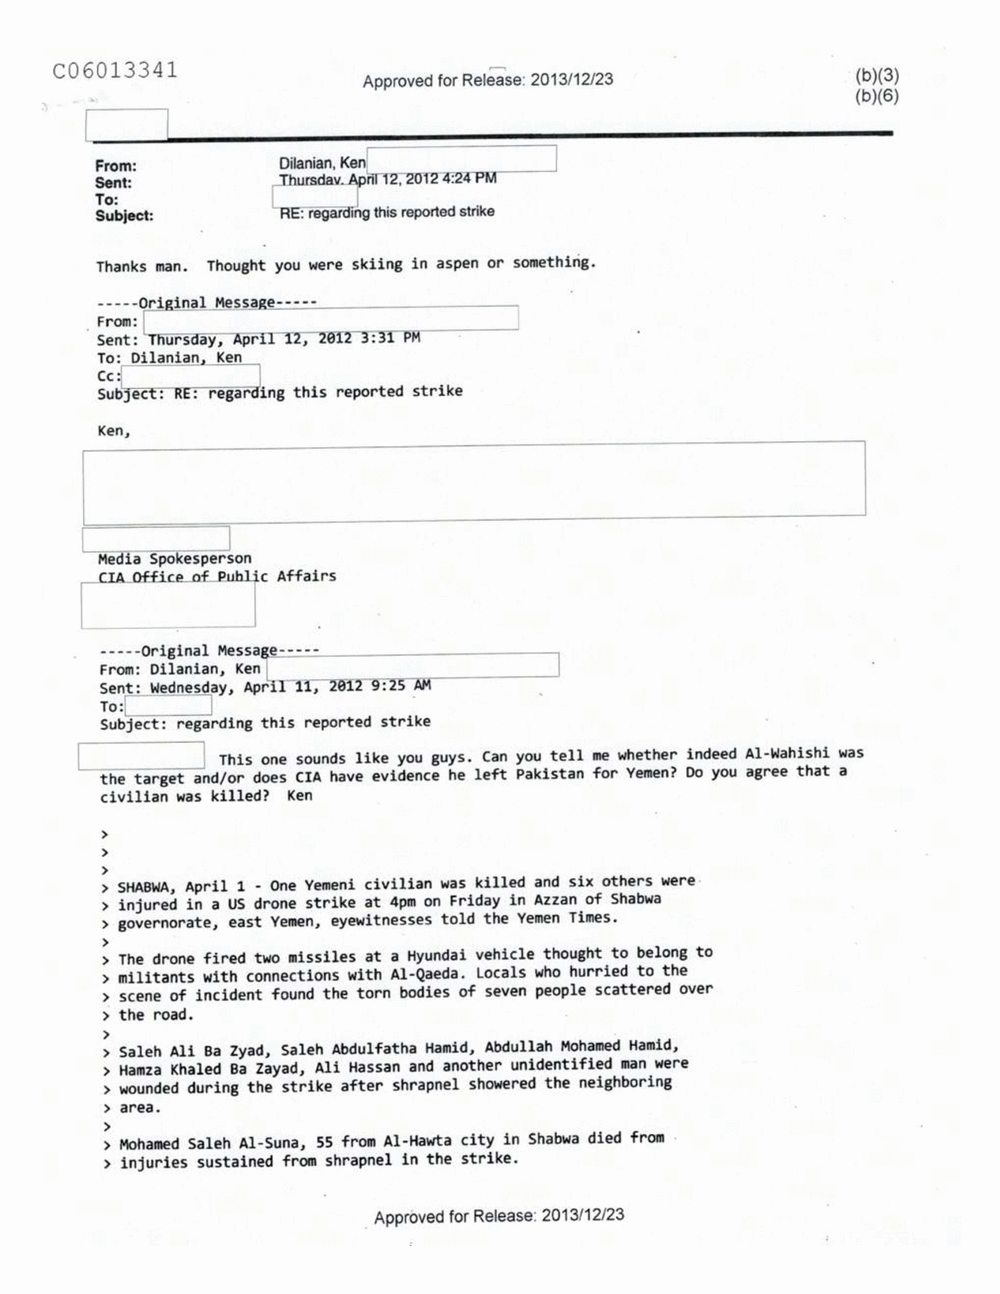 Page 248 from Email Correspondence Between Reporters and CIA Flacks